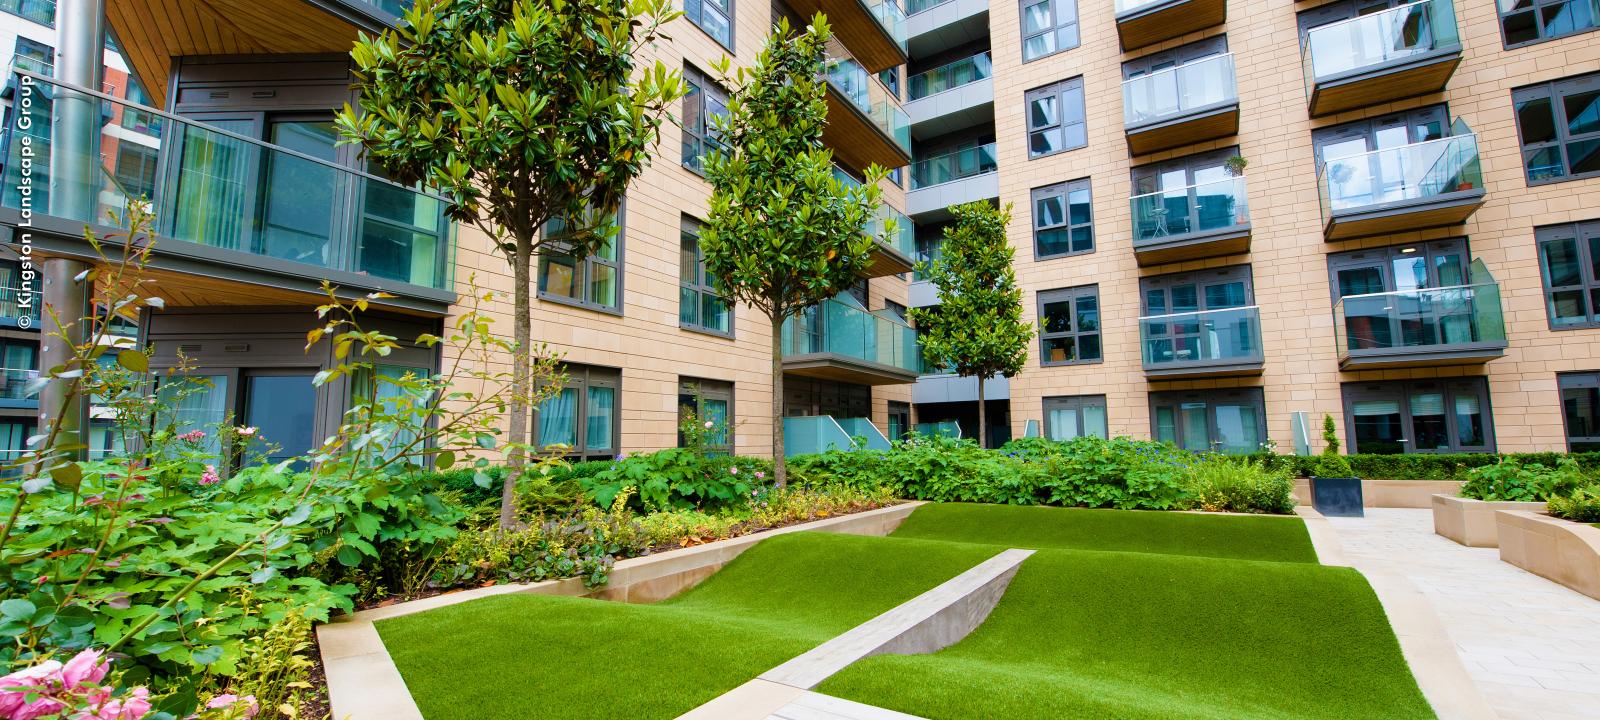 Lawn, small trees and plant beds surrounded by apartment blocks